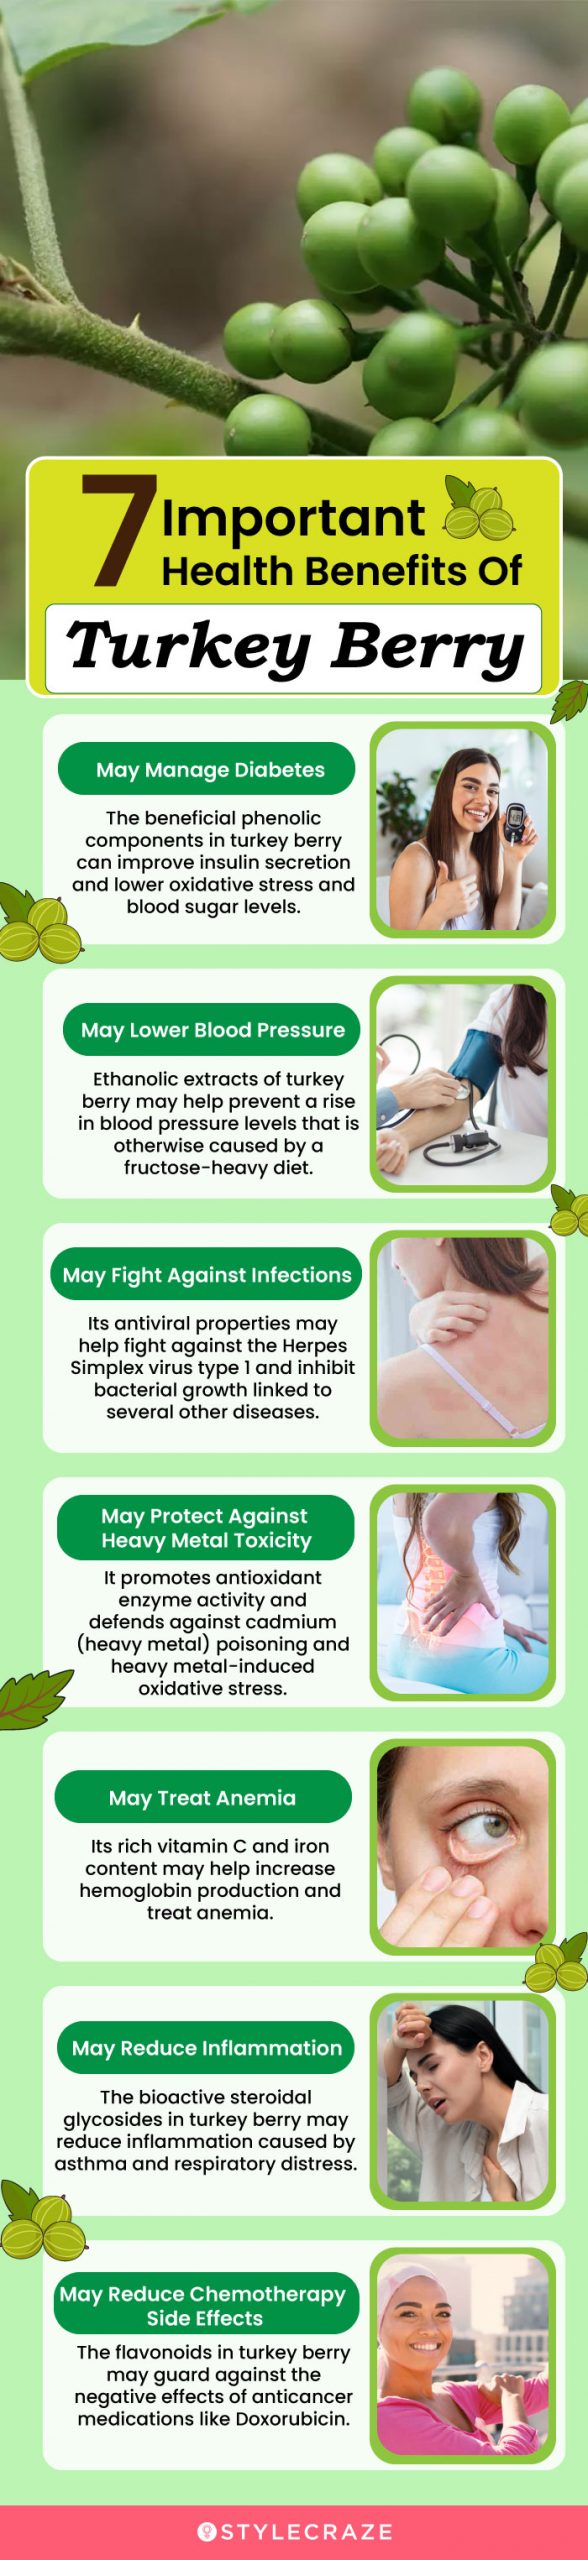 7 important health benefits of turkey berry (infographic)